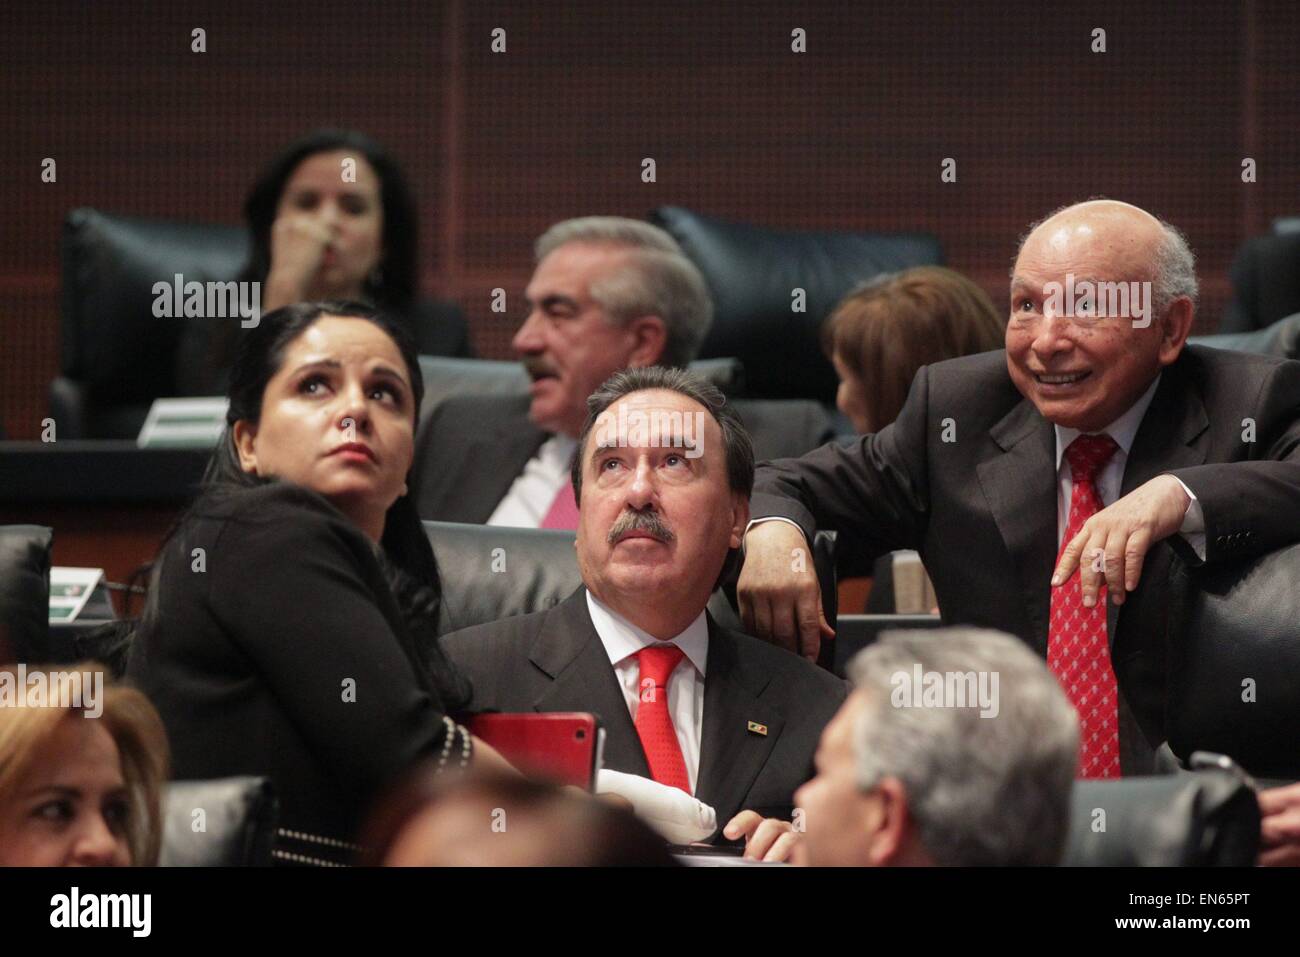 Mexico City, Mexico. 28th Apr, 2015. The senator of the Institutional Revolutionary Party Emilio Gamboa Patron (C) reacts during the vote of the political reform of the Federal District at the headquarters of the Republic's Senate, in Mexico City, capital of Mexico, on April 28, 2015. According to local press, the Senate approved the political reform of the Federal District, which among its most important highlights is that Mexico City will be provided with a local Congress and its own Constitution. Credit:  NOTIMEX/Xinhua/Alamy Live News Stock Photo